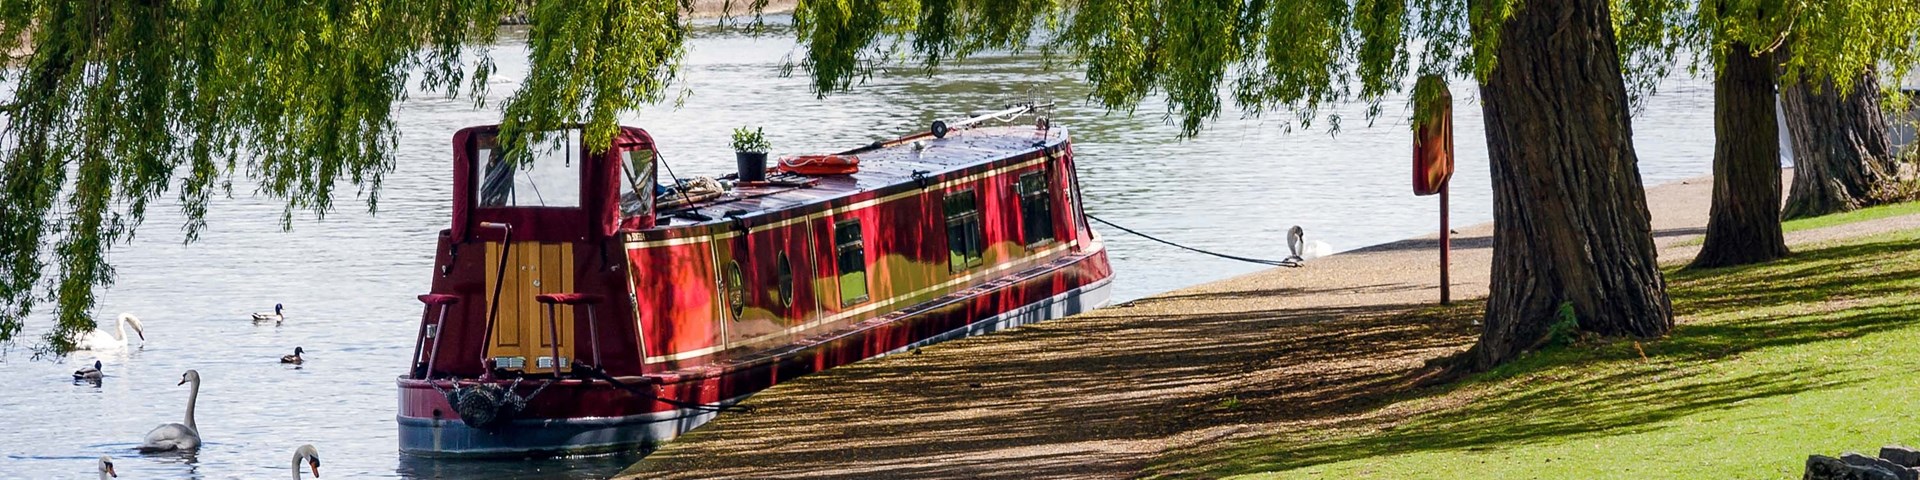 Collidge & Partners narrow boat moored on canal